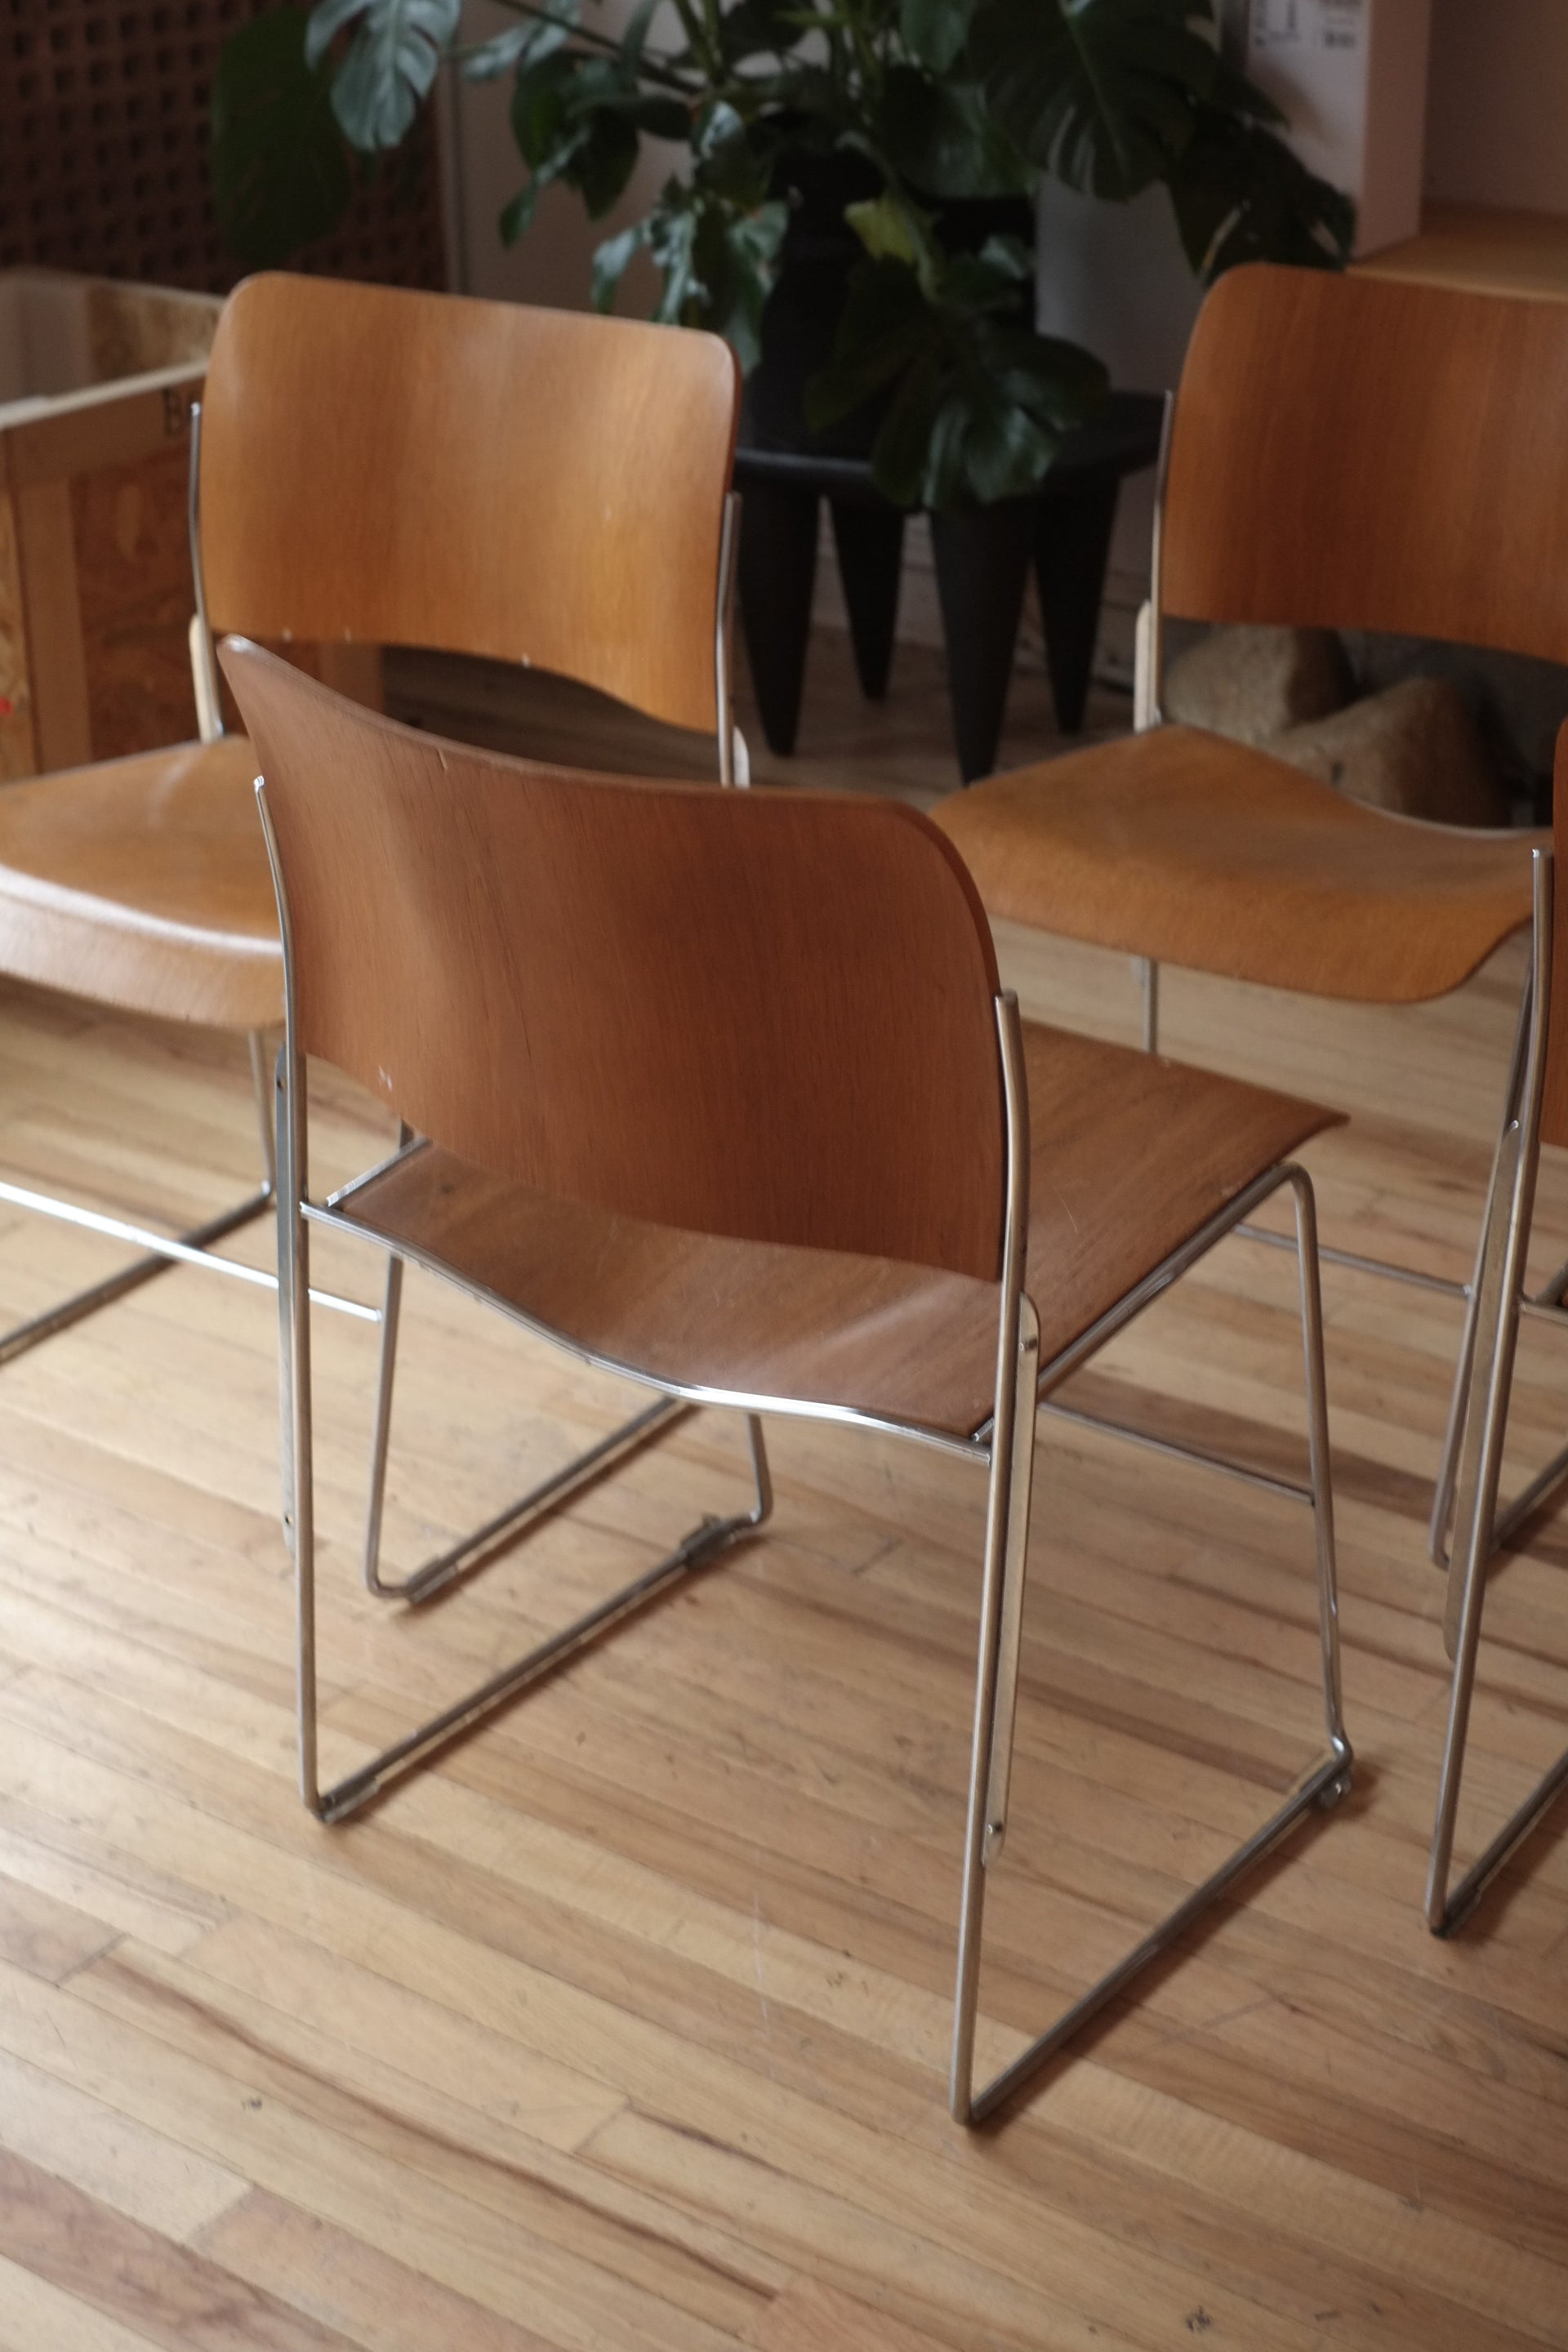 40/4 Stacking Chairs by David Rowland (Set of 4)